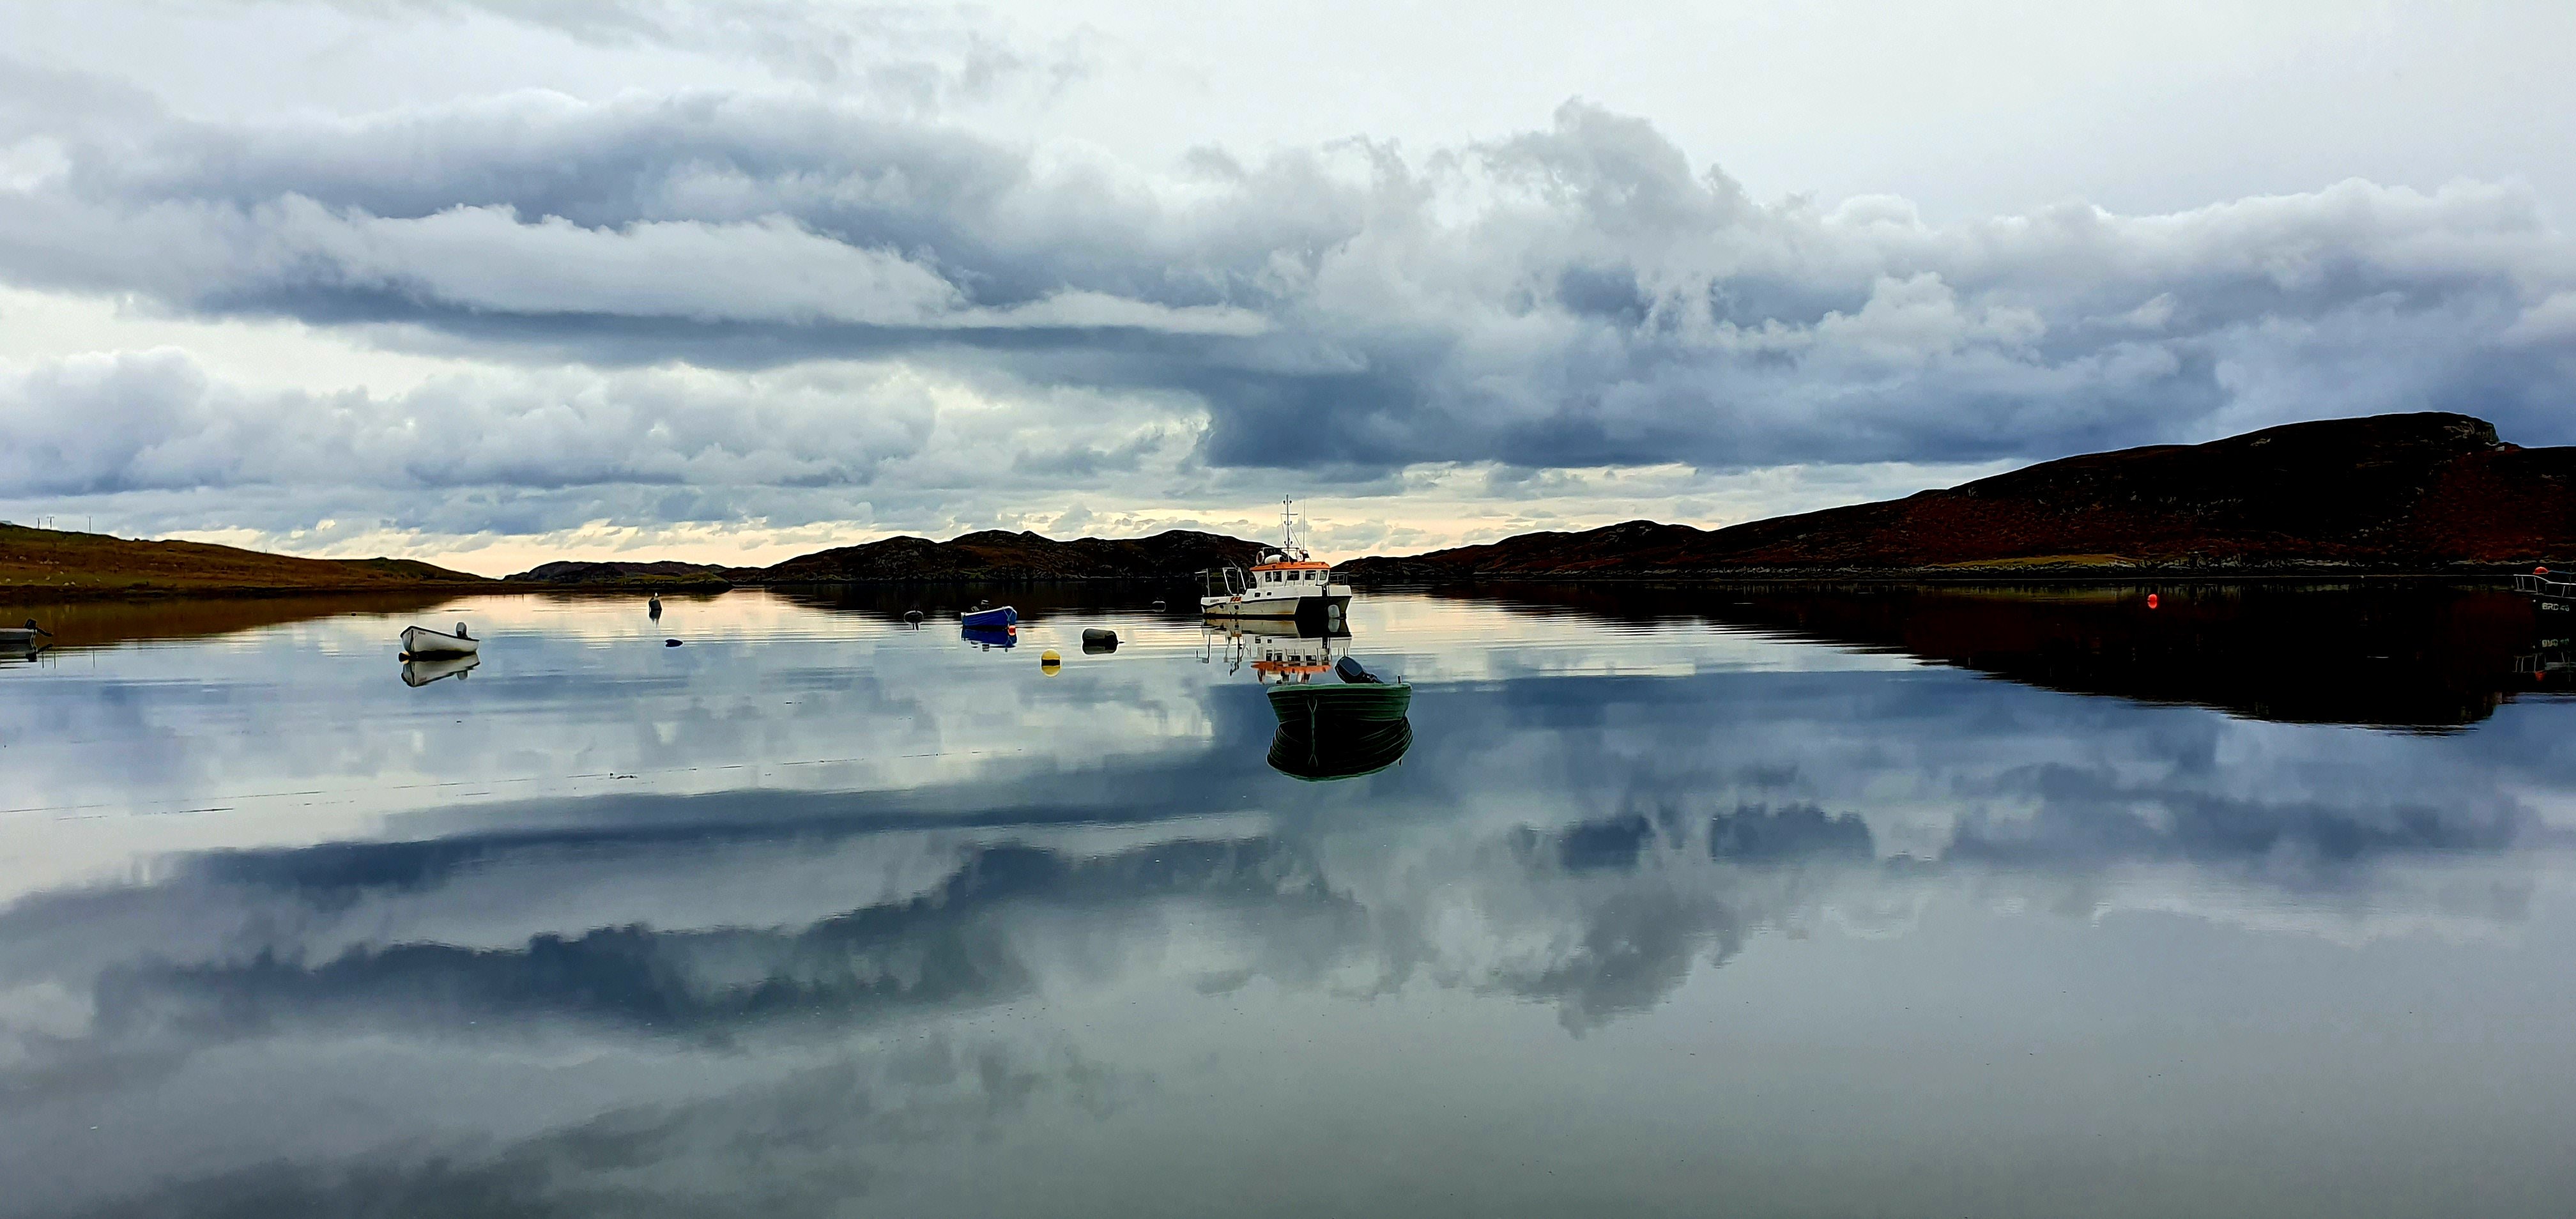 Perfect cloud reflection, Loch Leurbost, Isle of Lewis by Nic IlleMhoire @nicillemhoire